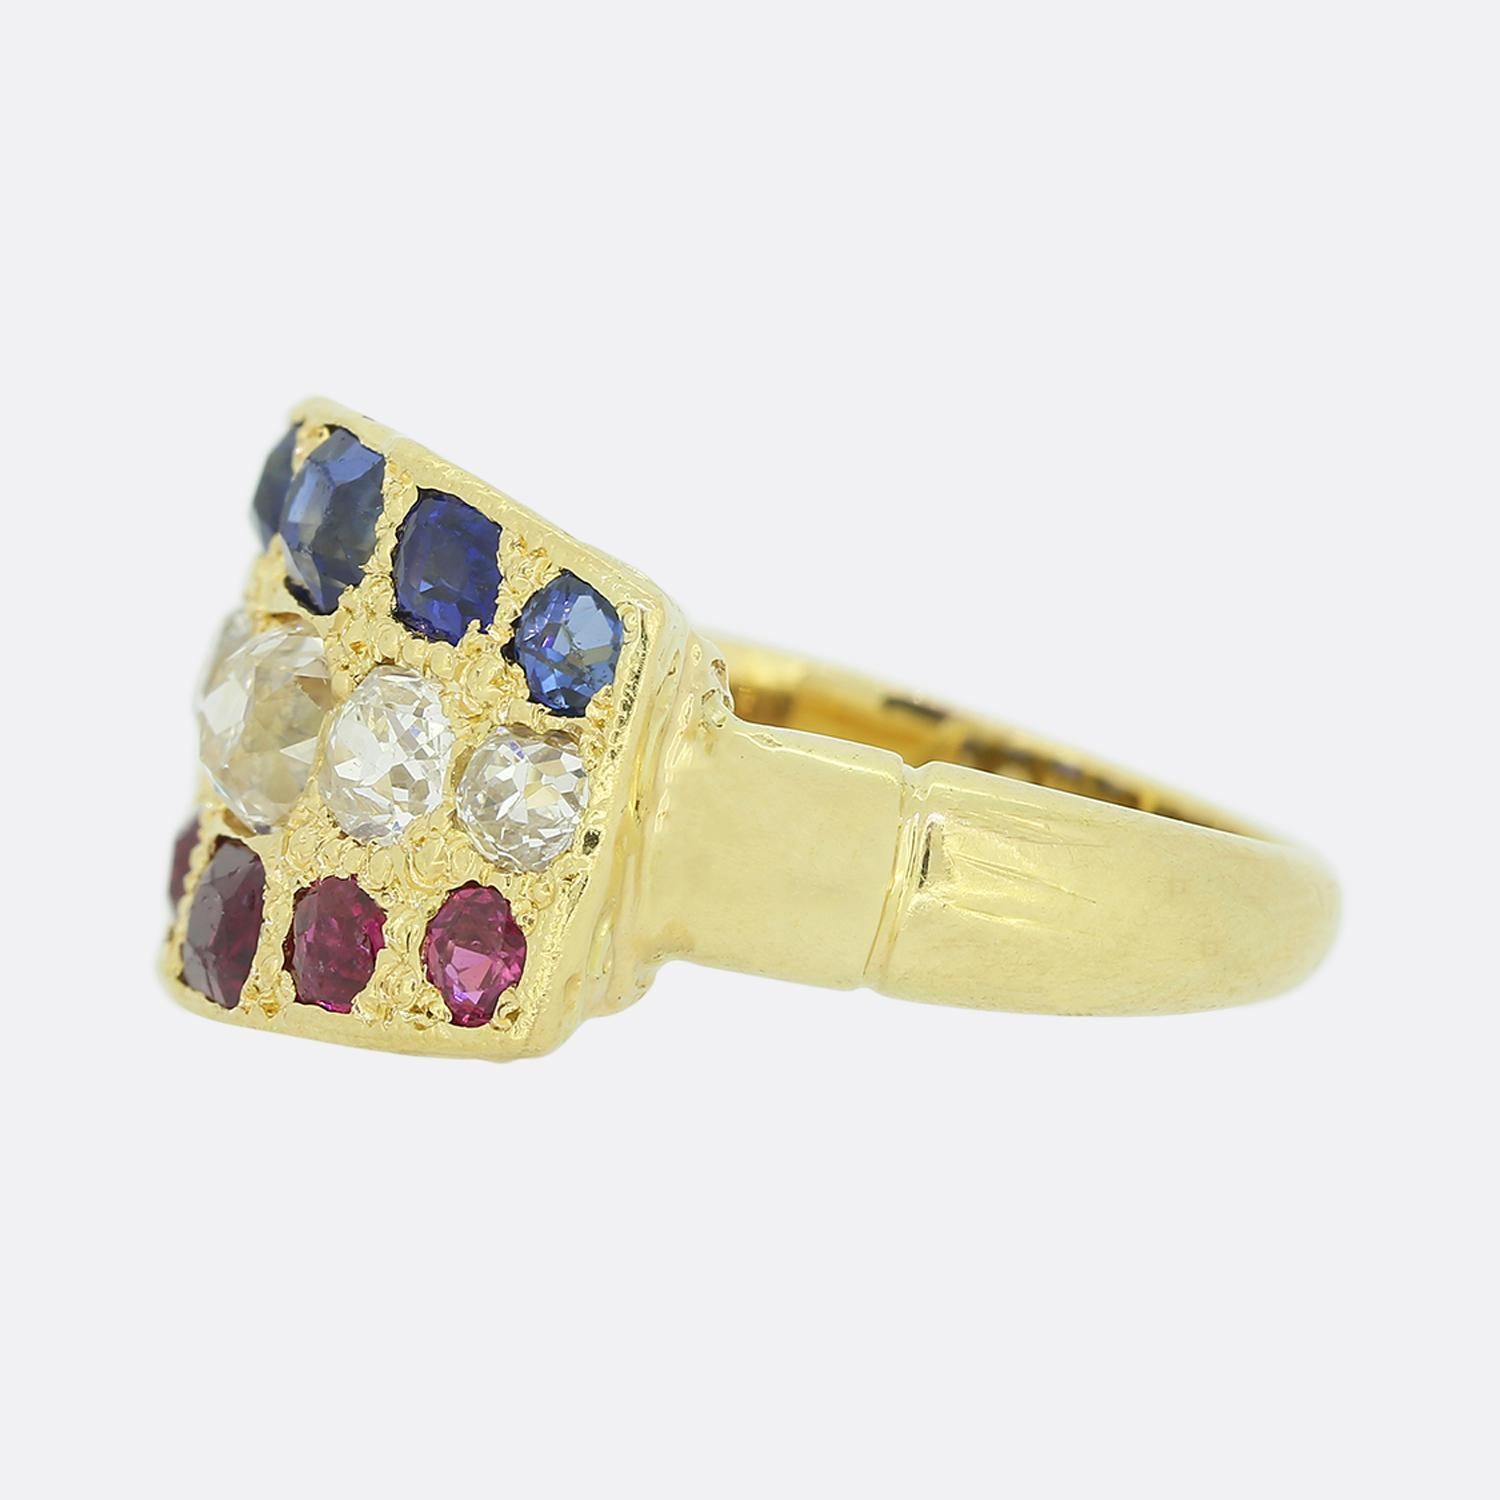 This is an Edwardian 18ct yellow gold three row ring. The ring features 5 rubies, 5 diamonds and 5 sapphires, each of which graduate in size to the centre. All of the stones are old cuts and the bright white sparkle of the diamonds is highly